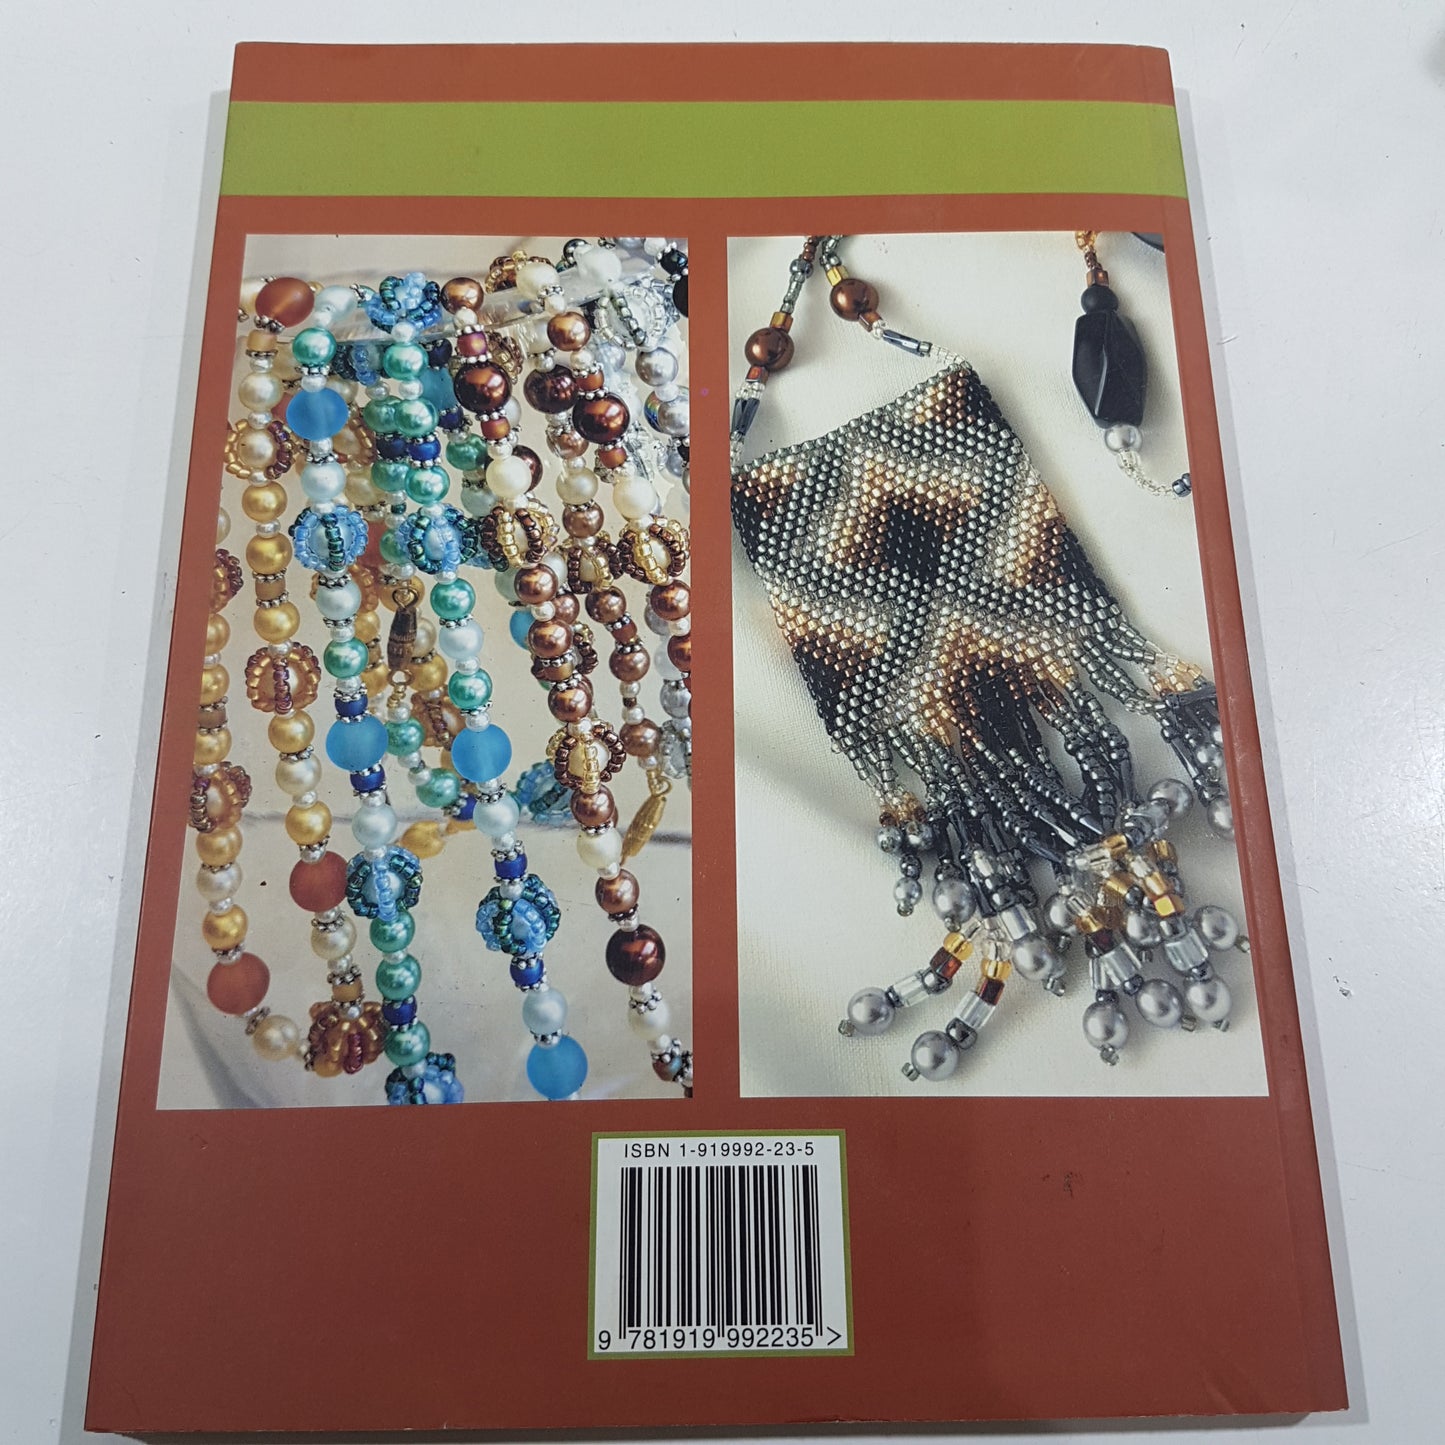 Pre Loved Dare to Bead Book